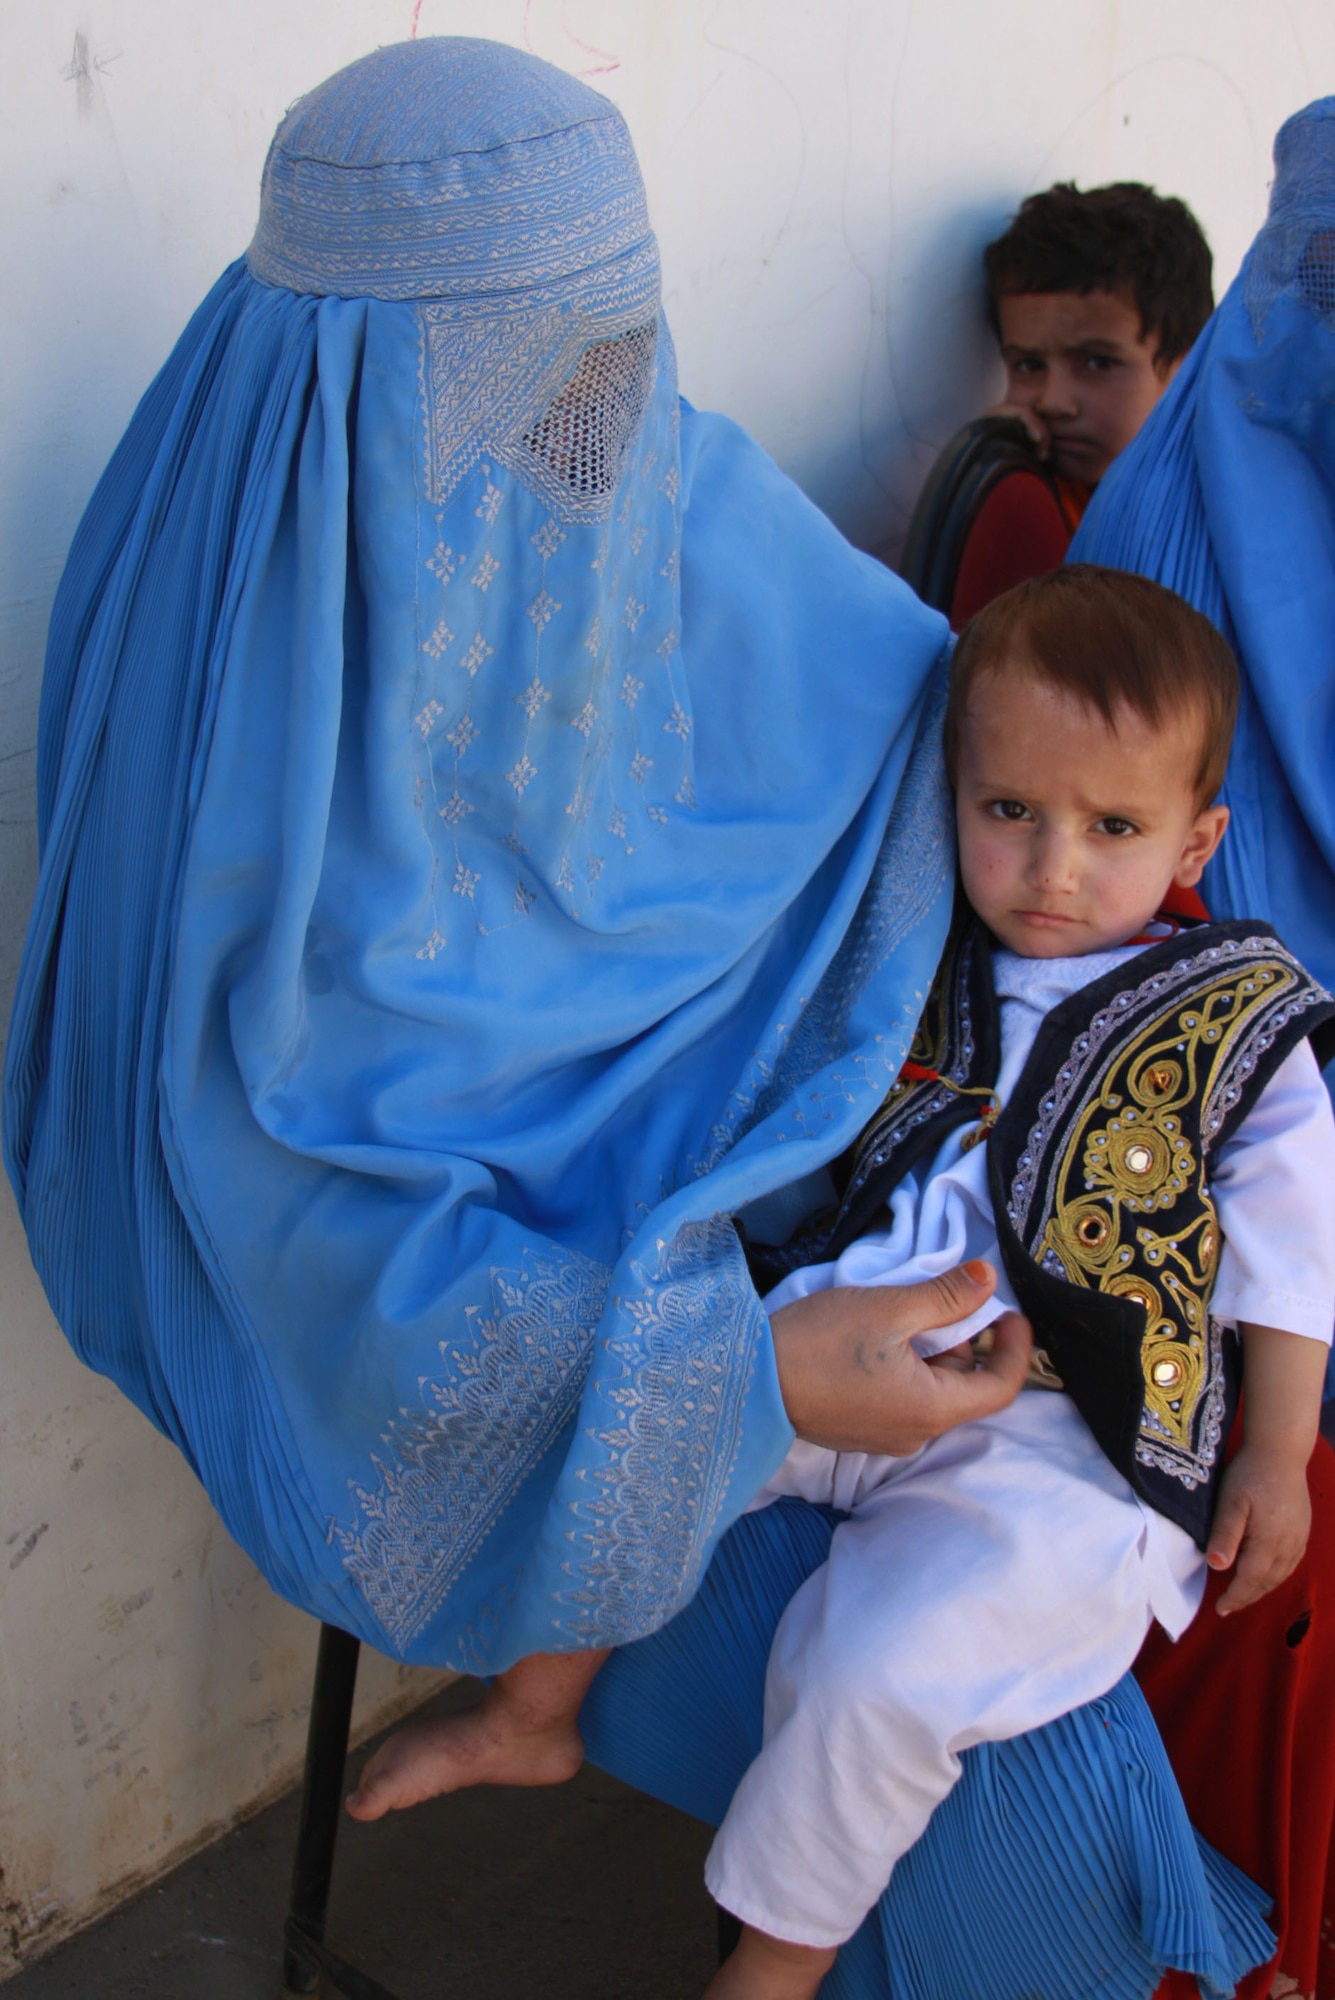 BAGRAM AIR FIELD, Afghanistan – An Afghan mother, veiled by a burqa, holds her son on her lap as they wait to be seen at the Obdara clinic, where PRT Panjshir medical personnel assisted a local midwife and nurse on Oct. 16. 

